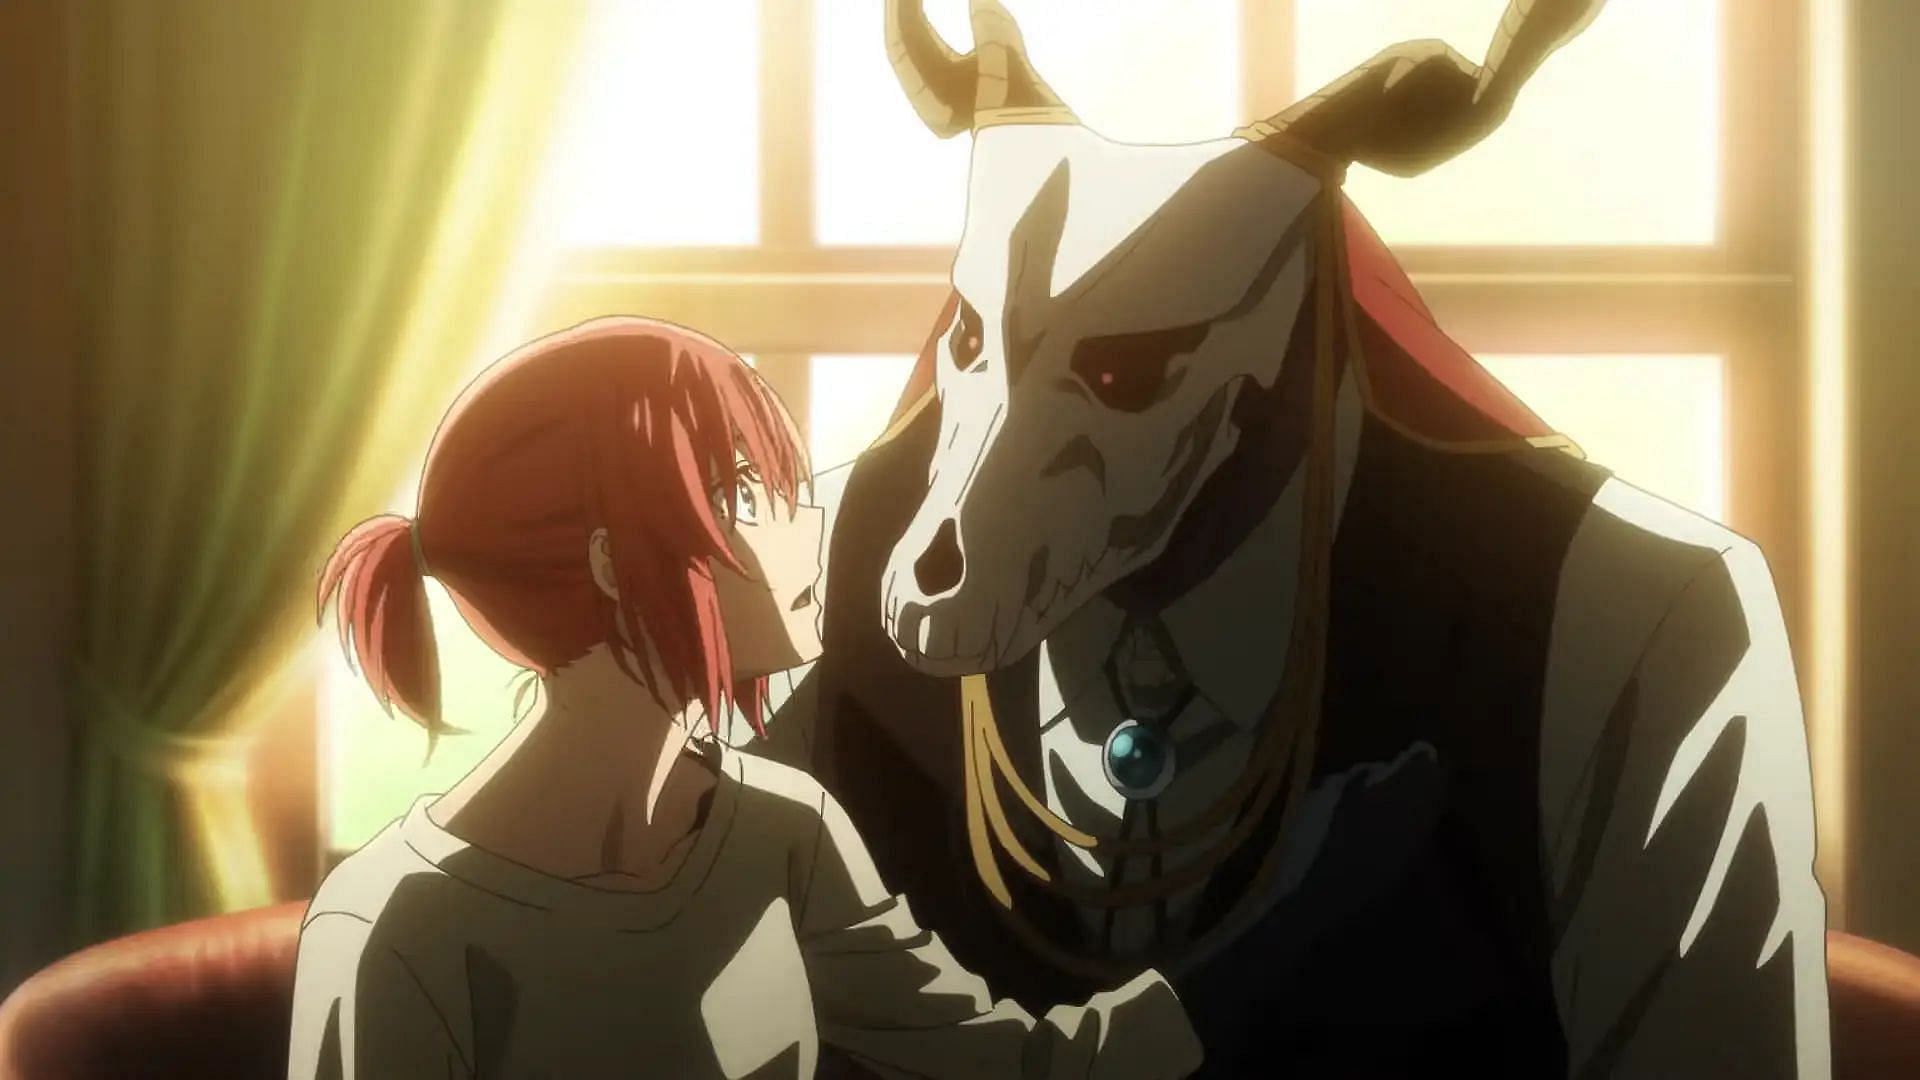 Kore Yamazaki's Ghost and Witch, and The Ancient Magus Bride Manga